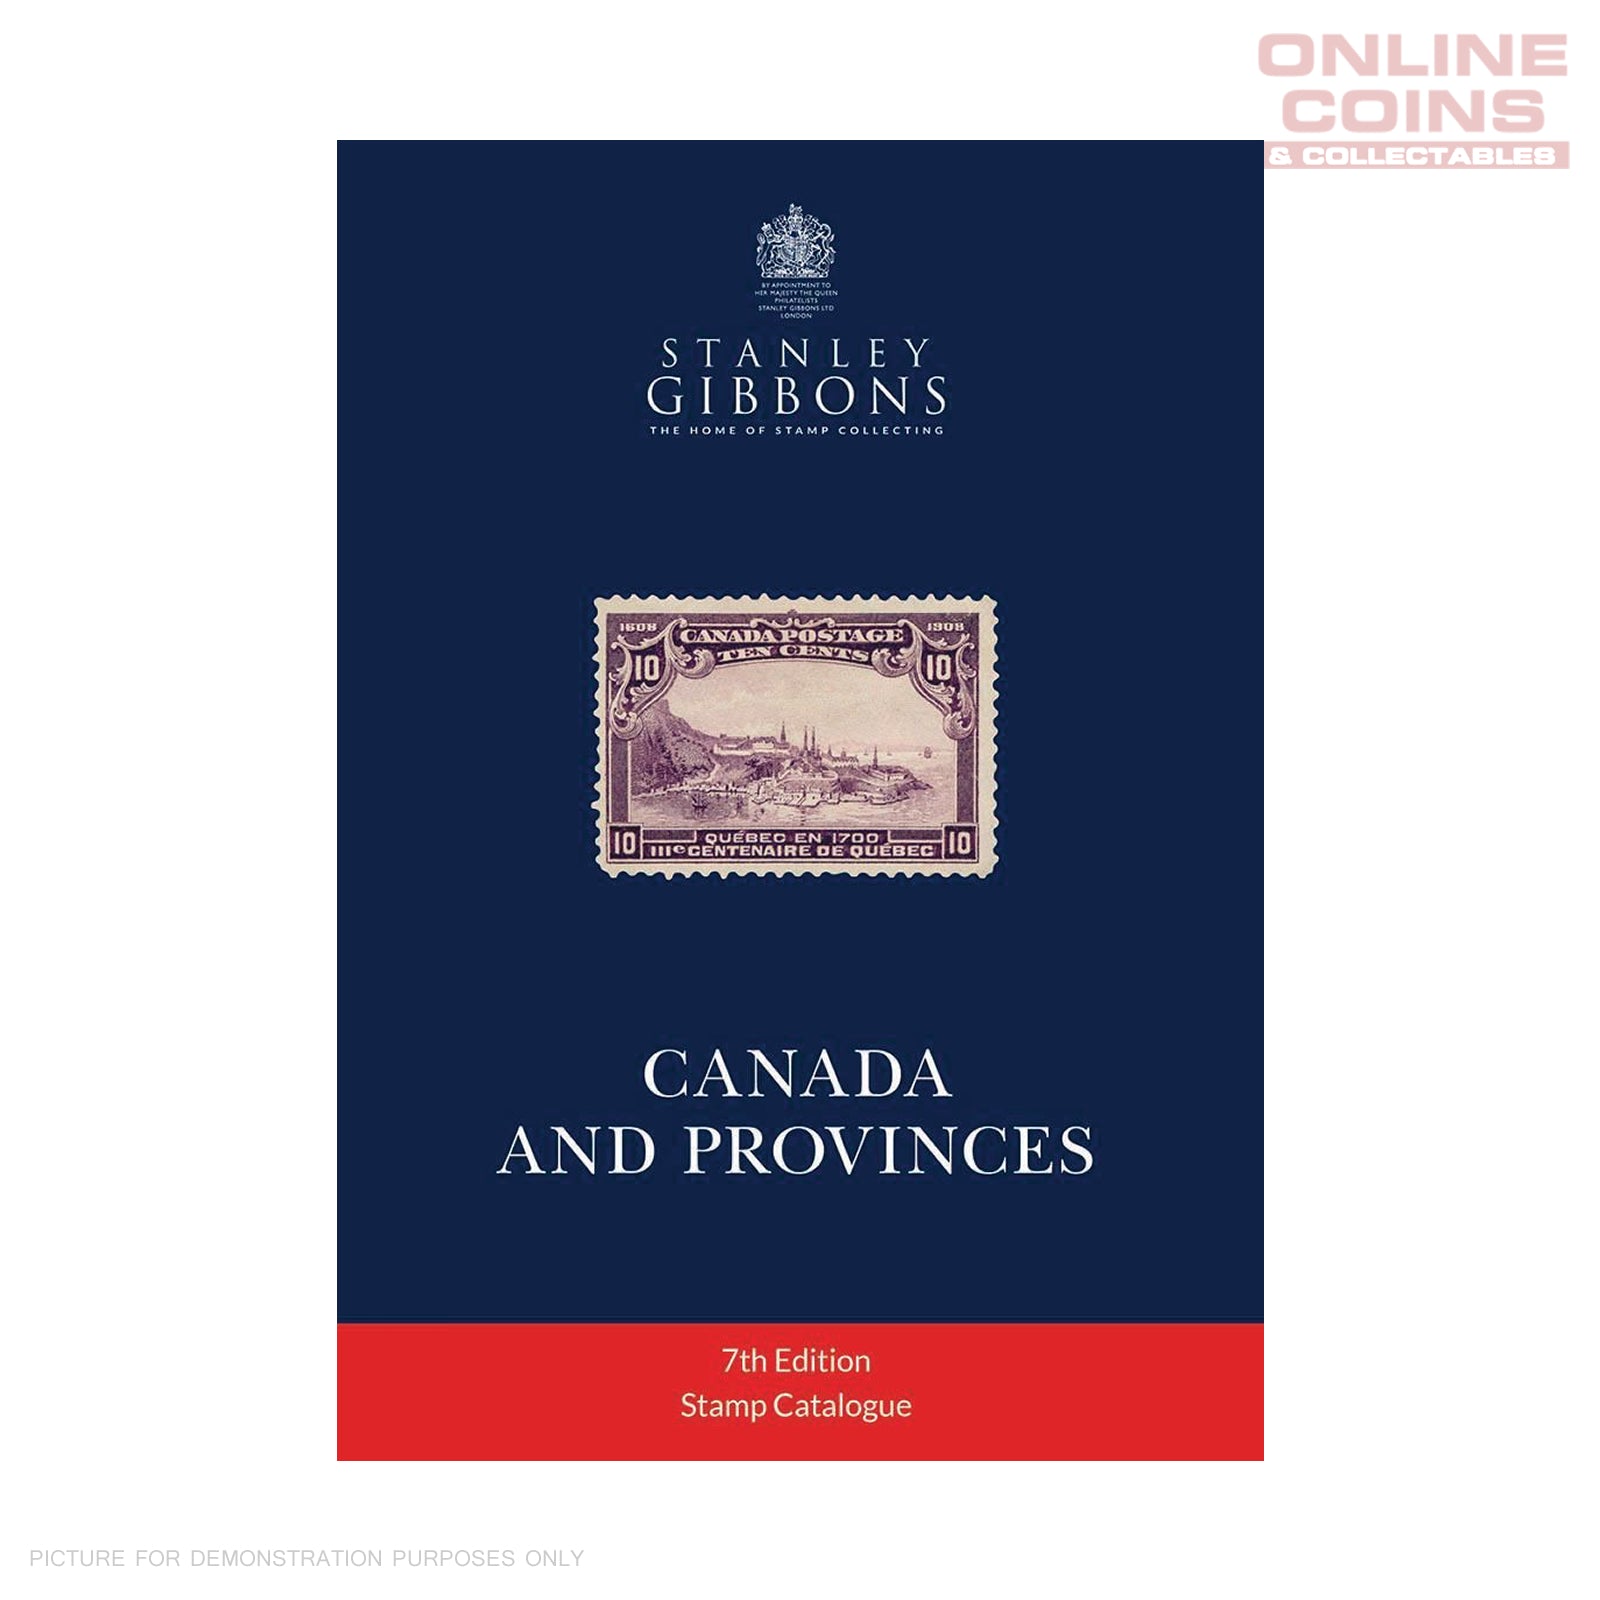 Stanley Gibbons - Canada & Provinces Stamp Catalogue 7th Edition 2020